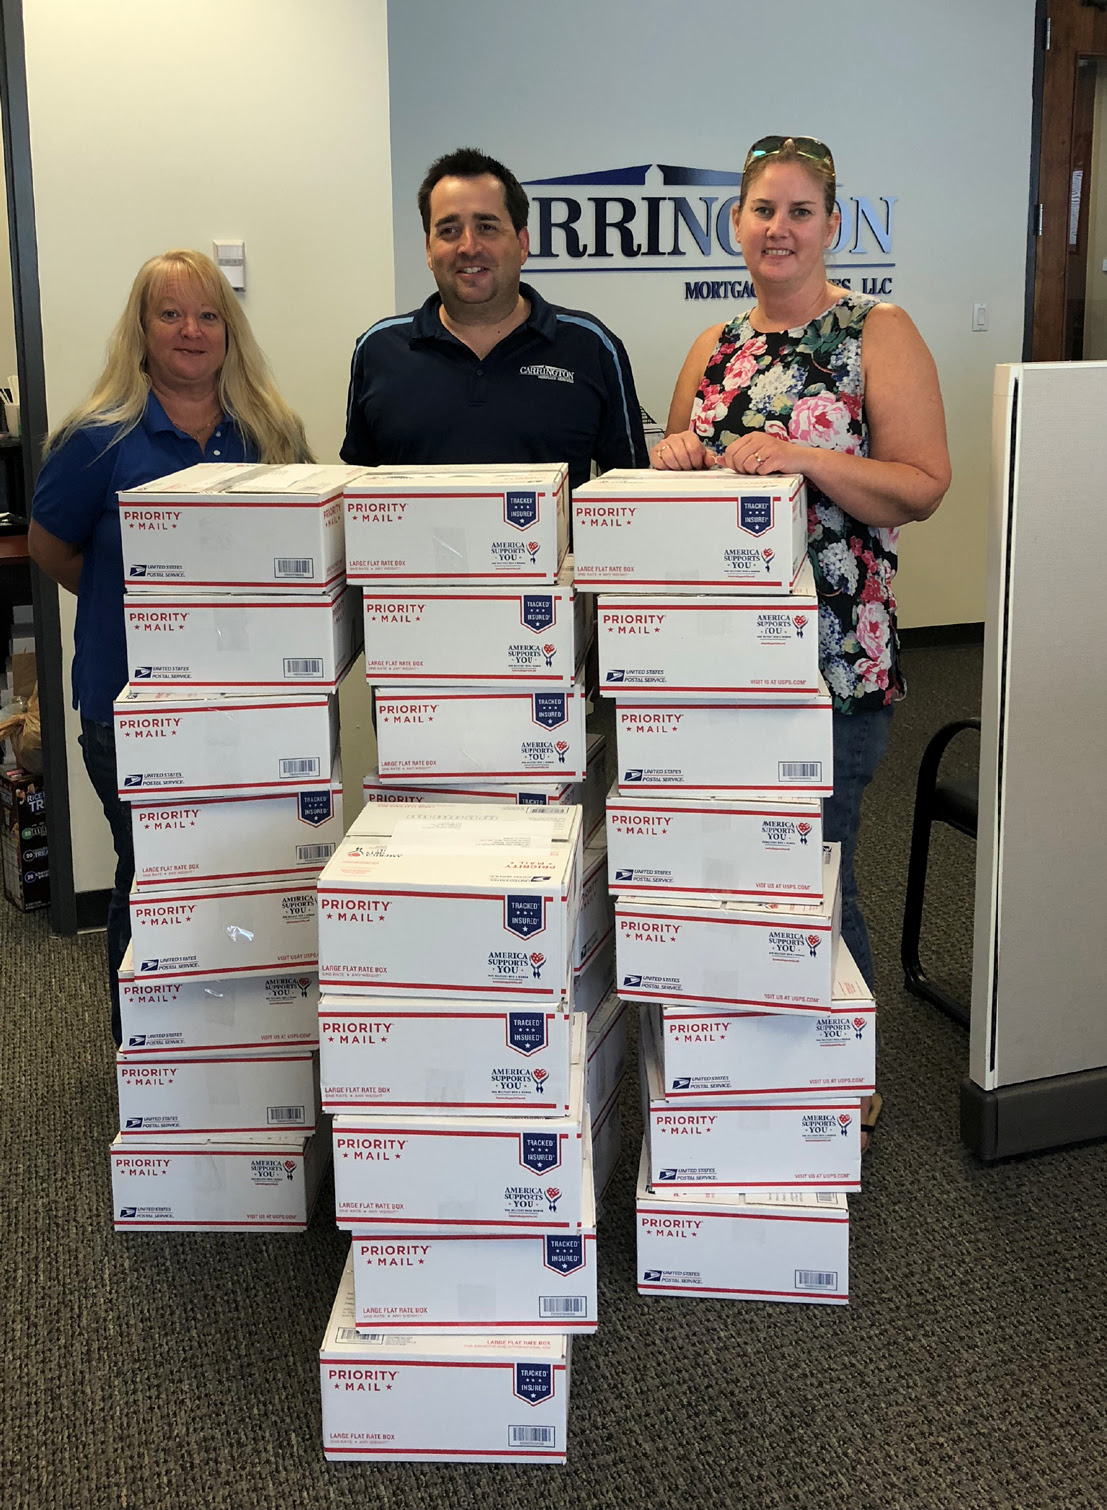 The Carrington Mortgage Services team in Lakeland, Florida, proudly packed boxes for overseas military servicemembers